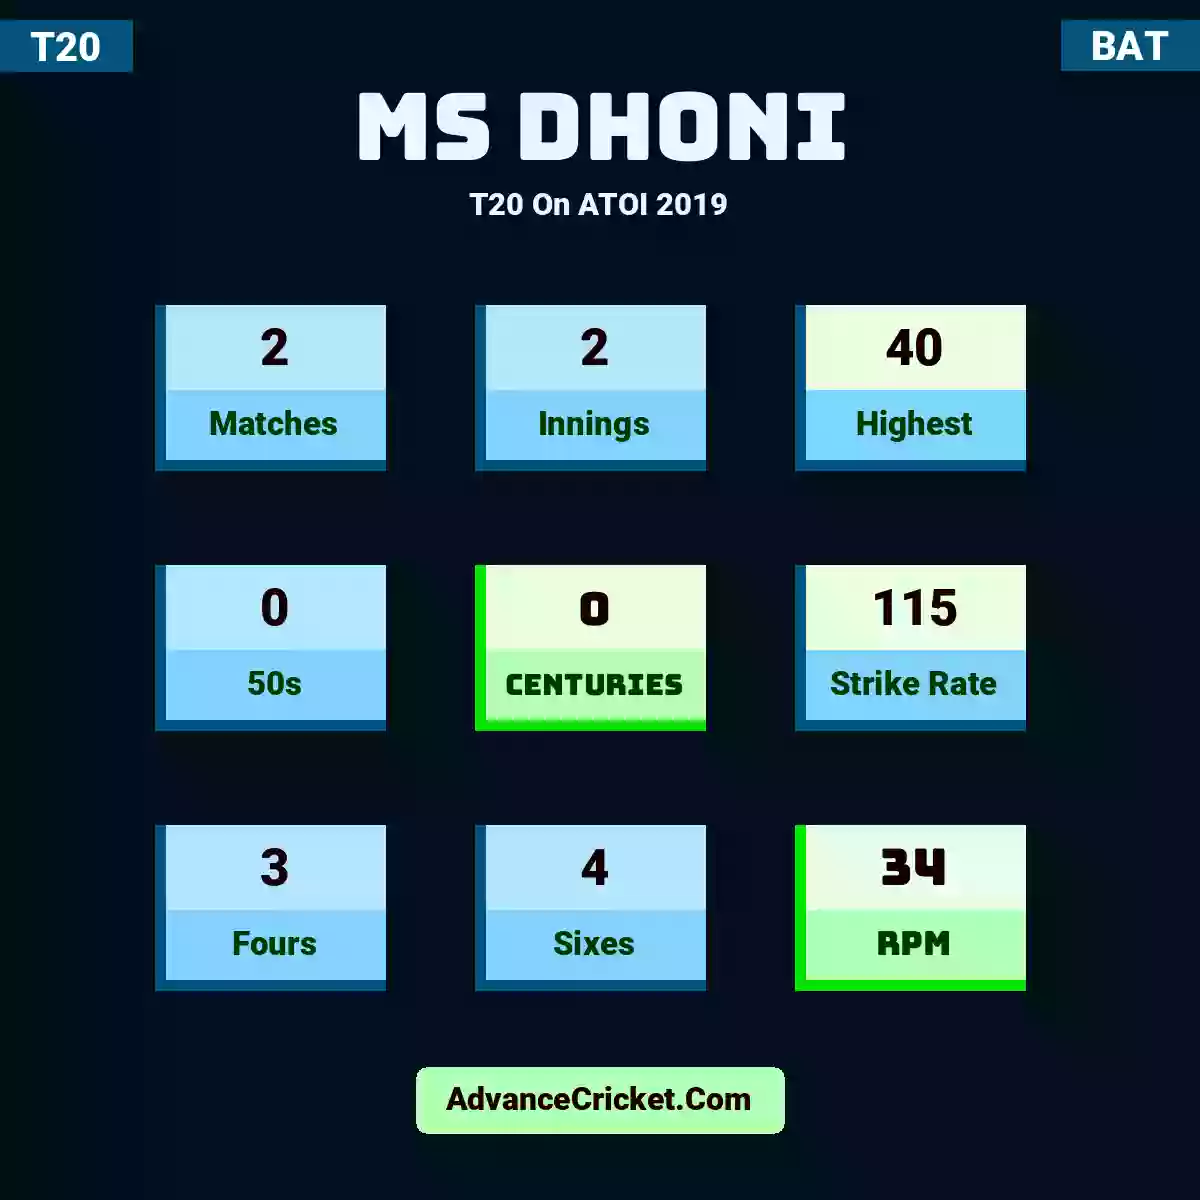 MS Dhoni T20  On ATOI 2019, MS Dhoni played 2 matches, scored 40 runs as highest, 0 half-centuries, and 0 centuries, with a strike rate of 115. M.Dhoni hit 3 fours and 4 sixes, with an RPM of 34.